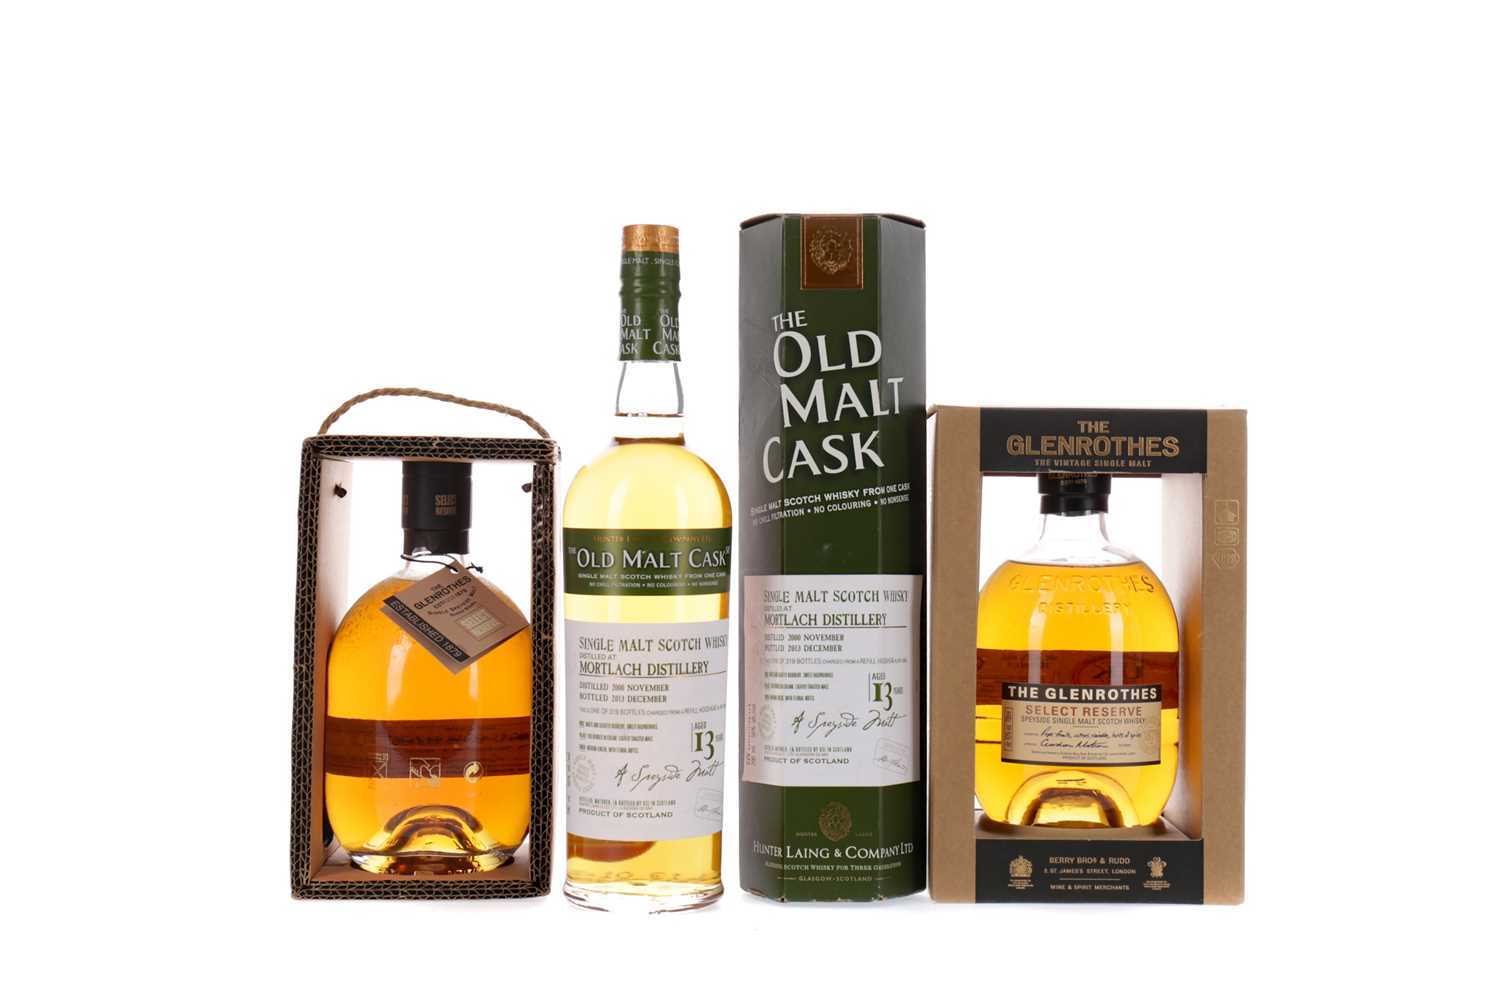 Lot 140 - MORTLACH 2000 OLD MALT CASK AGED 13 YEARS, AND TWO GLENROTHES SELECT RESERVE